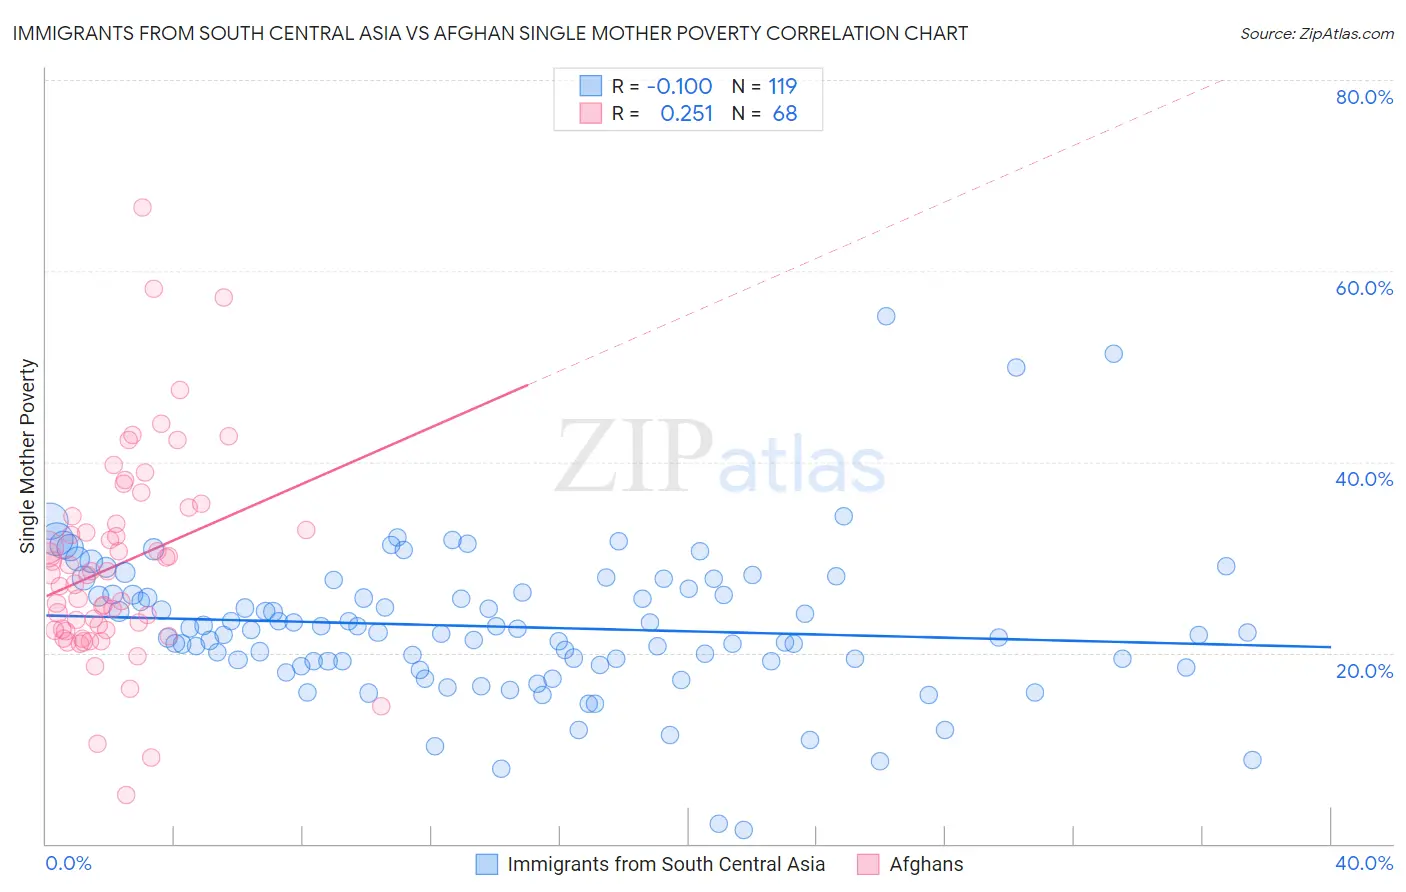 Immigrants from South Central Asia vs Afghan Single Mother Poverty